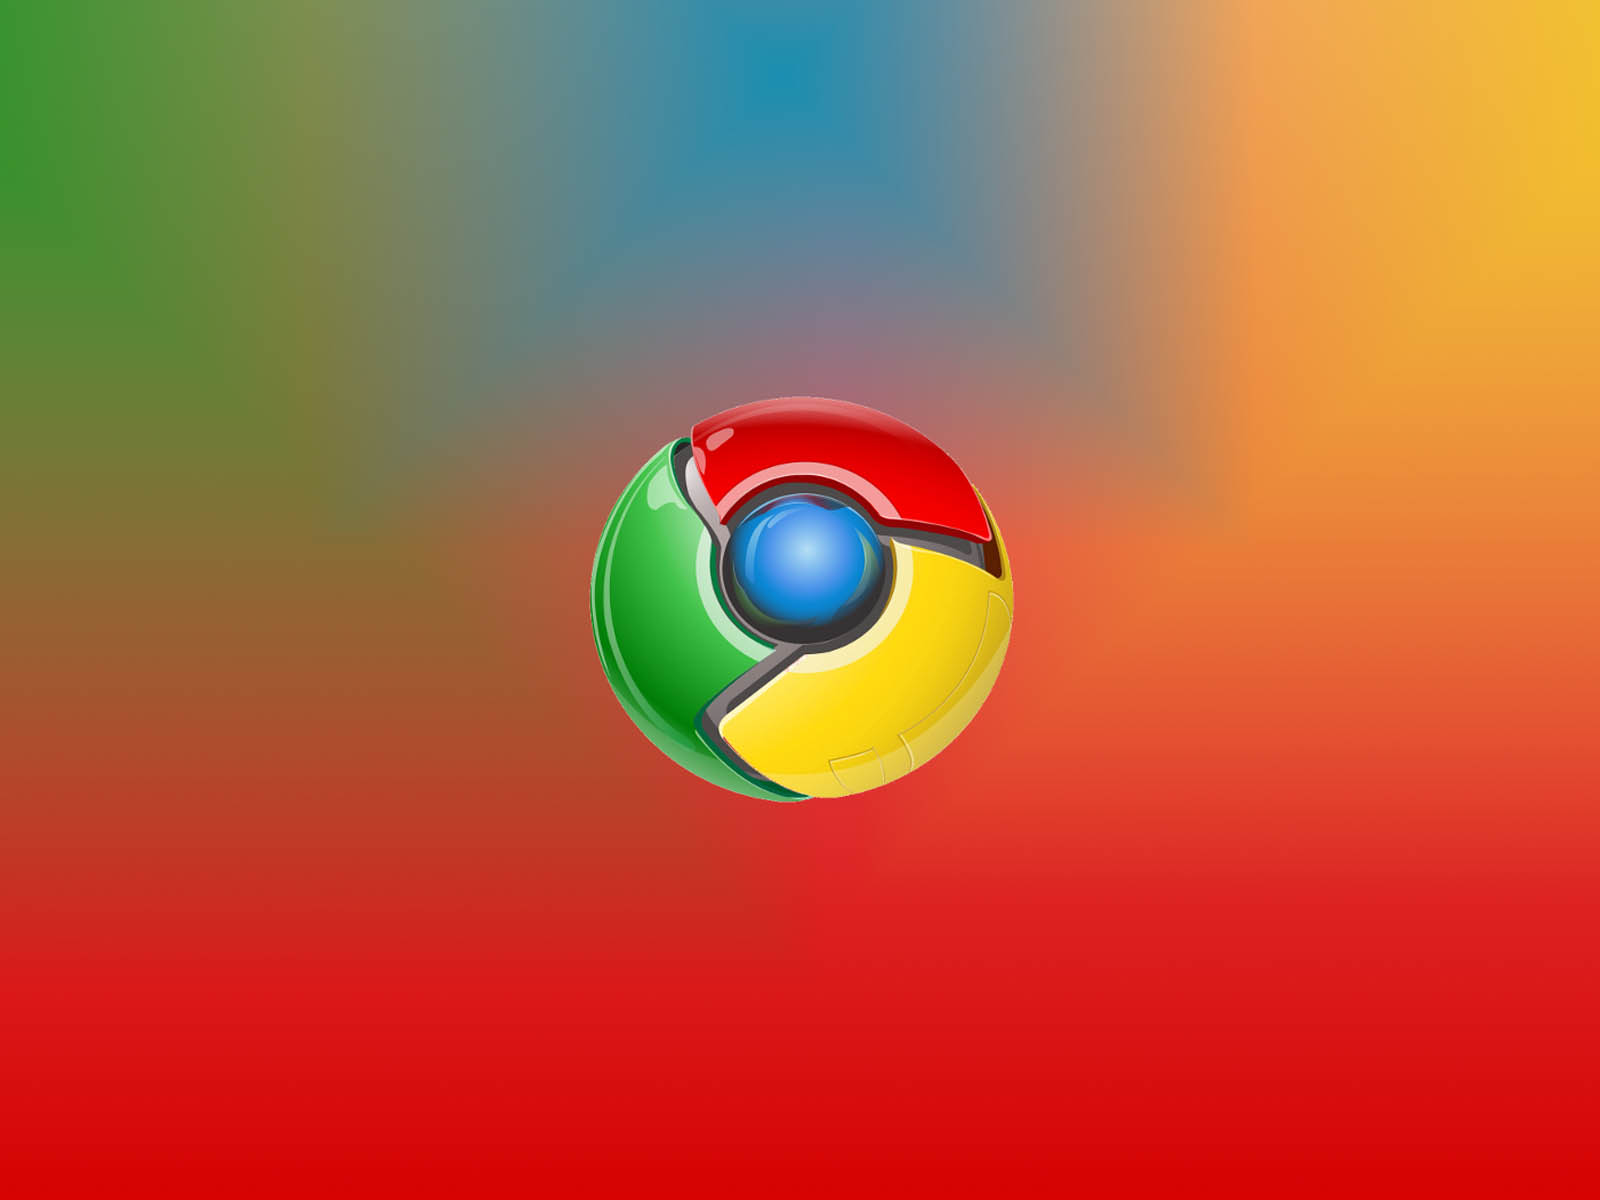 google wallpaper background,colorfulness,operating system,logo,macro photography,graphics